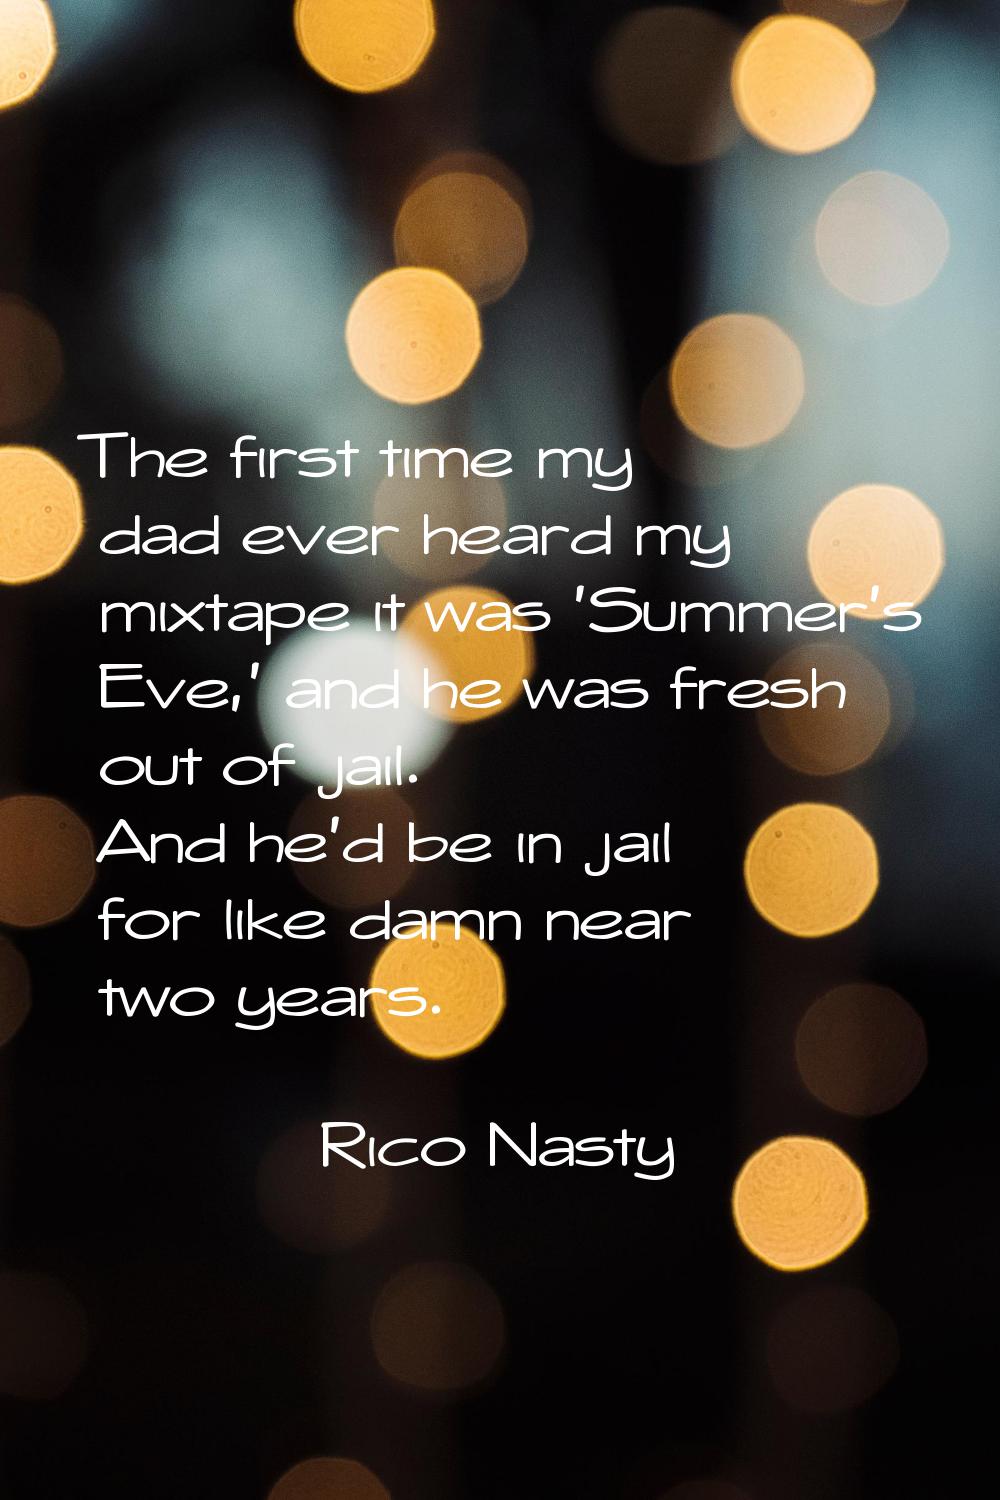 The first time my dad ever heard my mixtape it was 'Summer's Eve,' and he was fresh out of jail. An